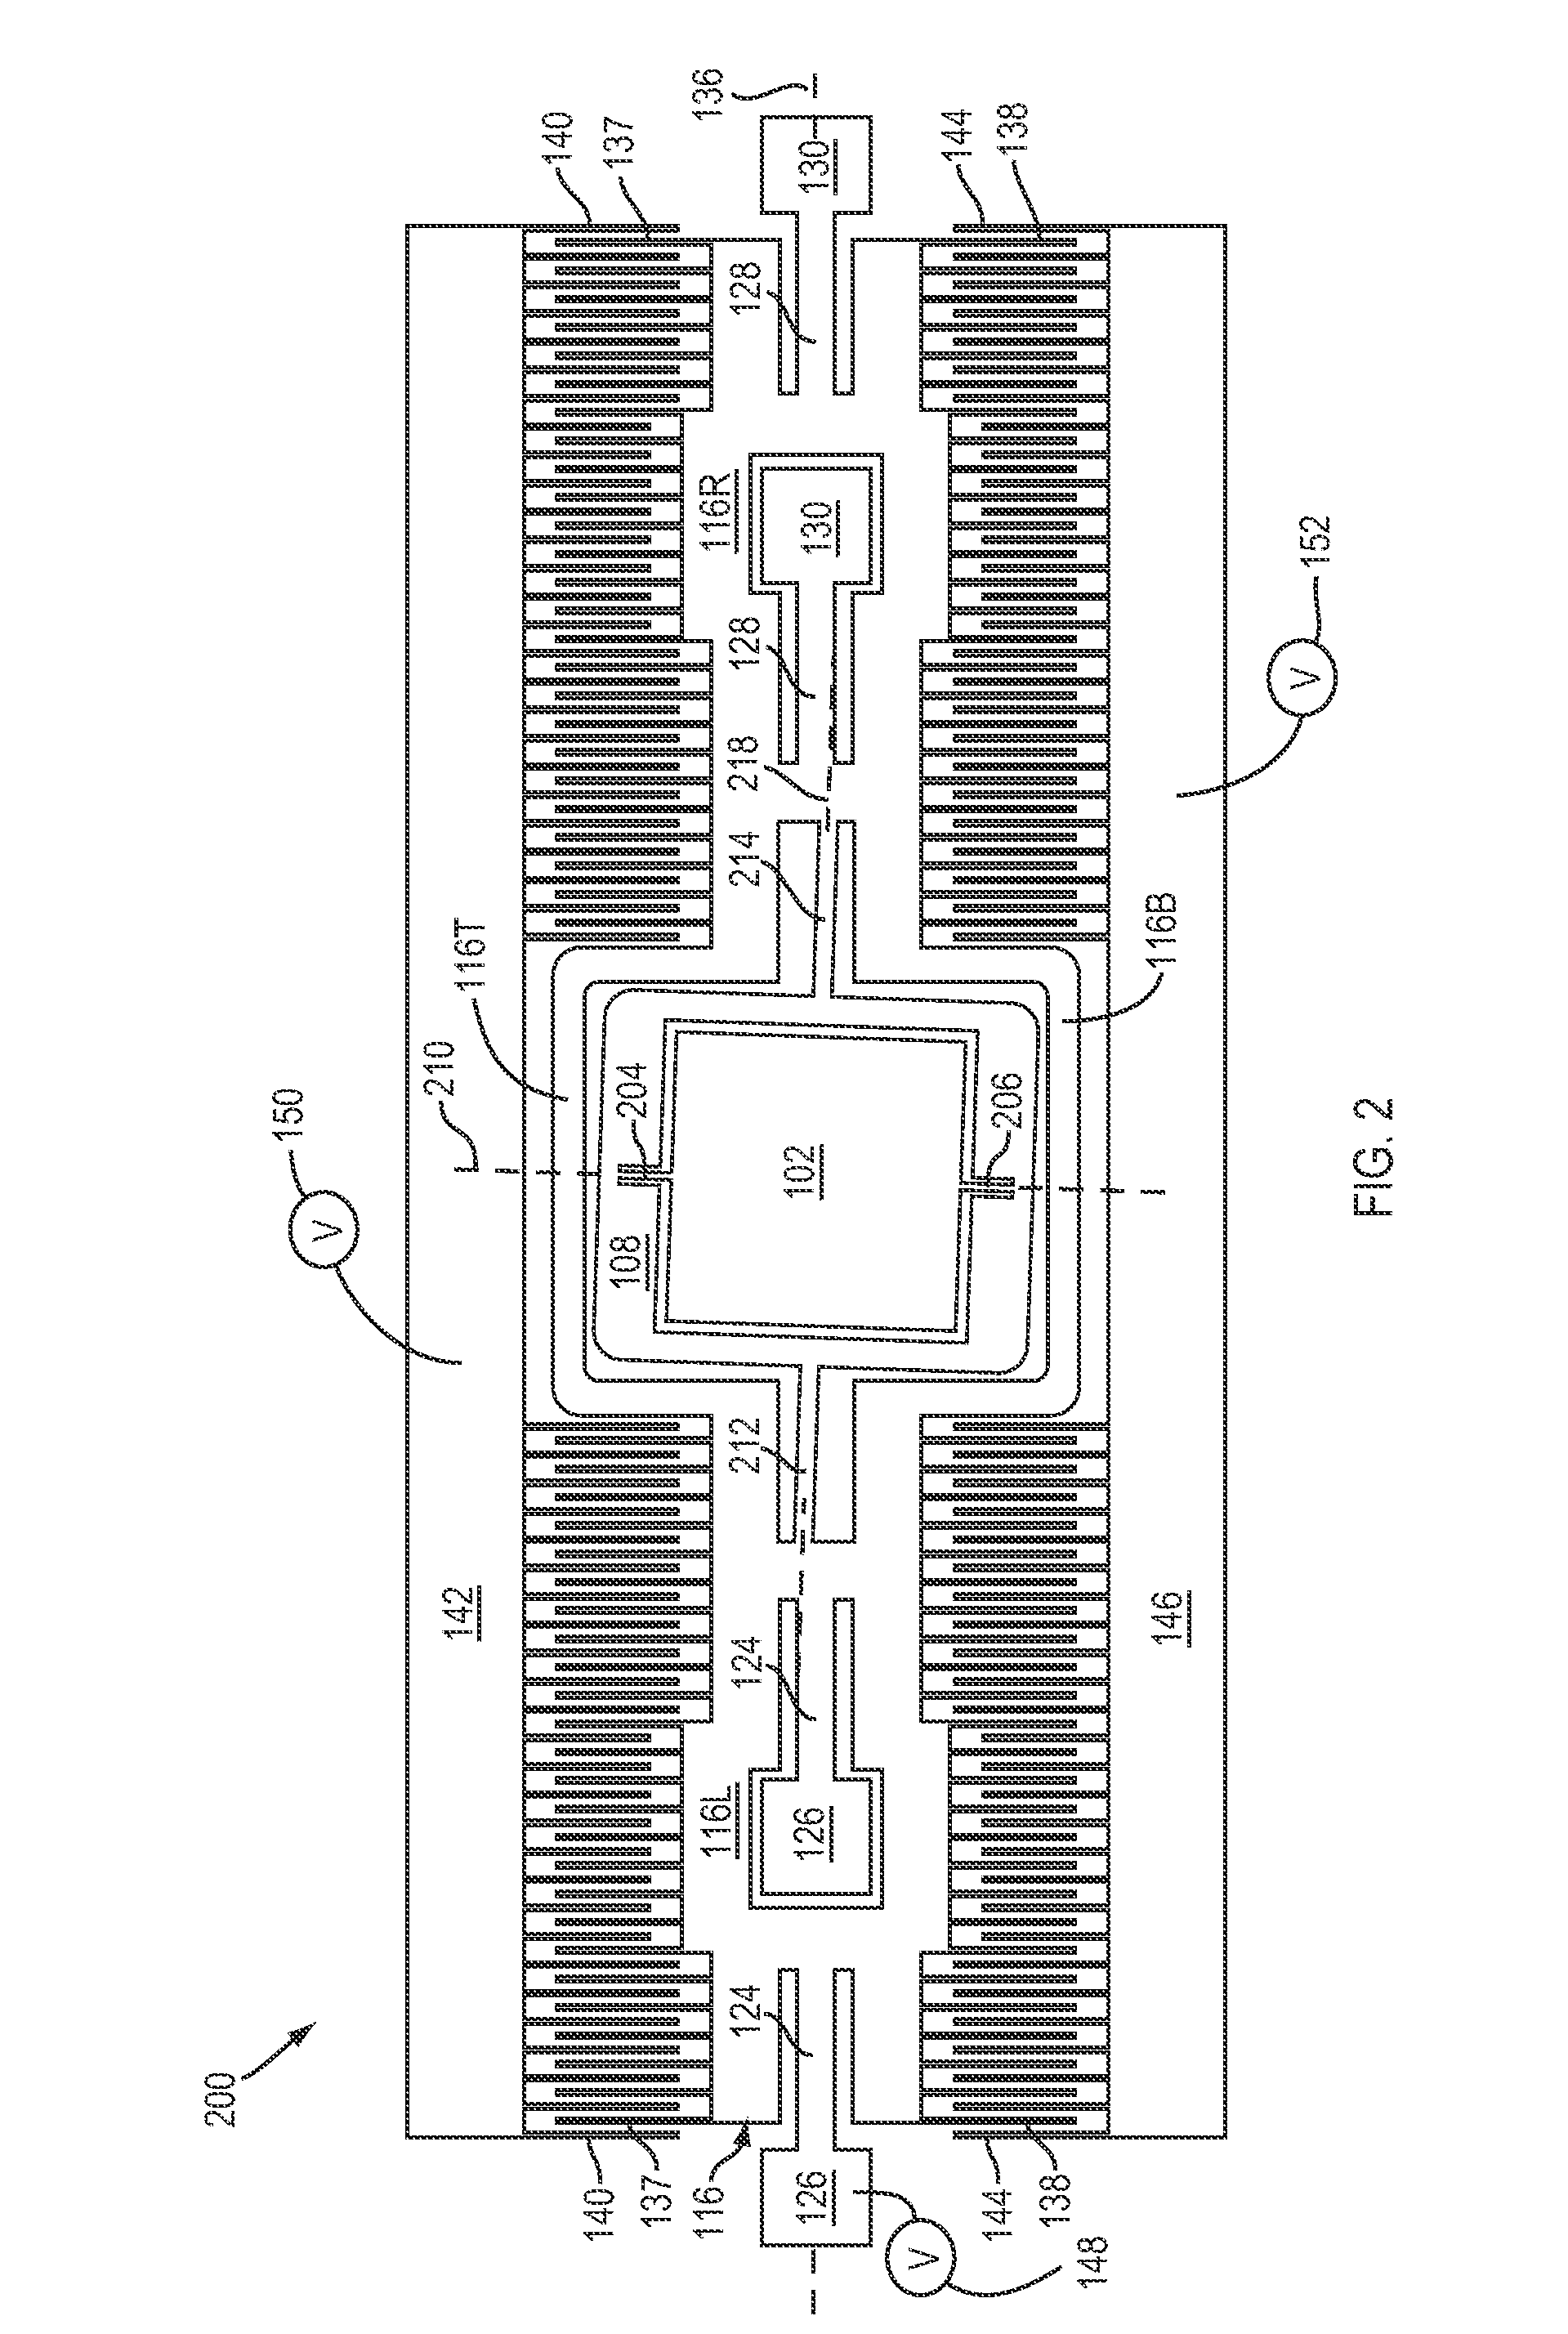 MEMS device with off-axis actuator